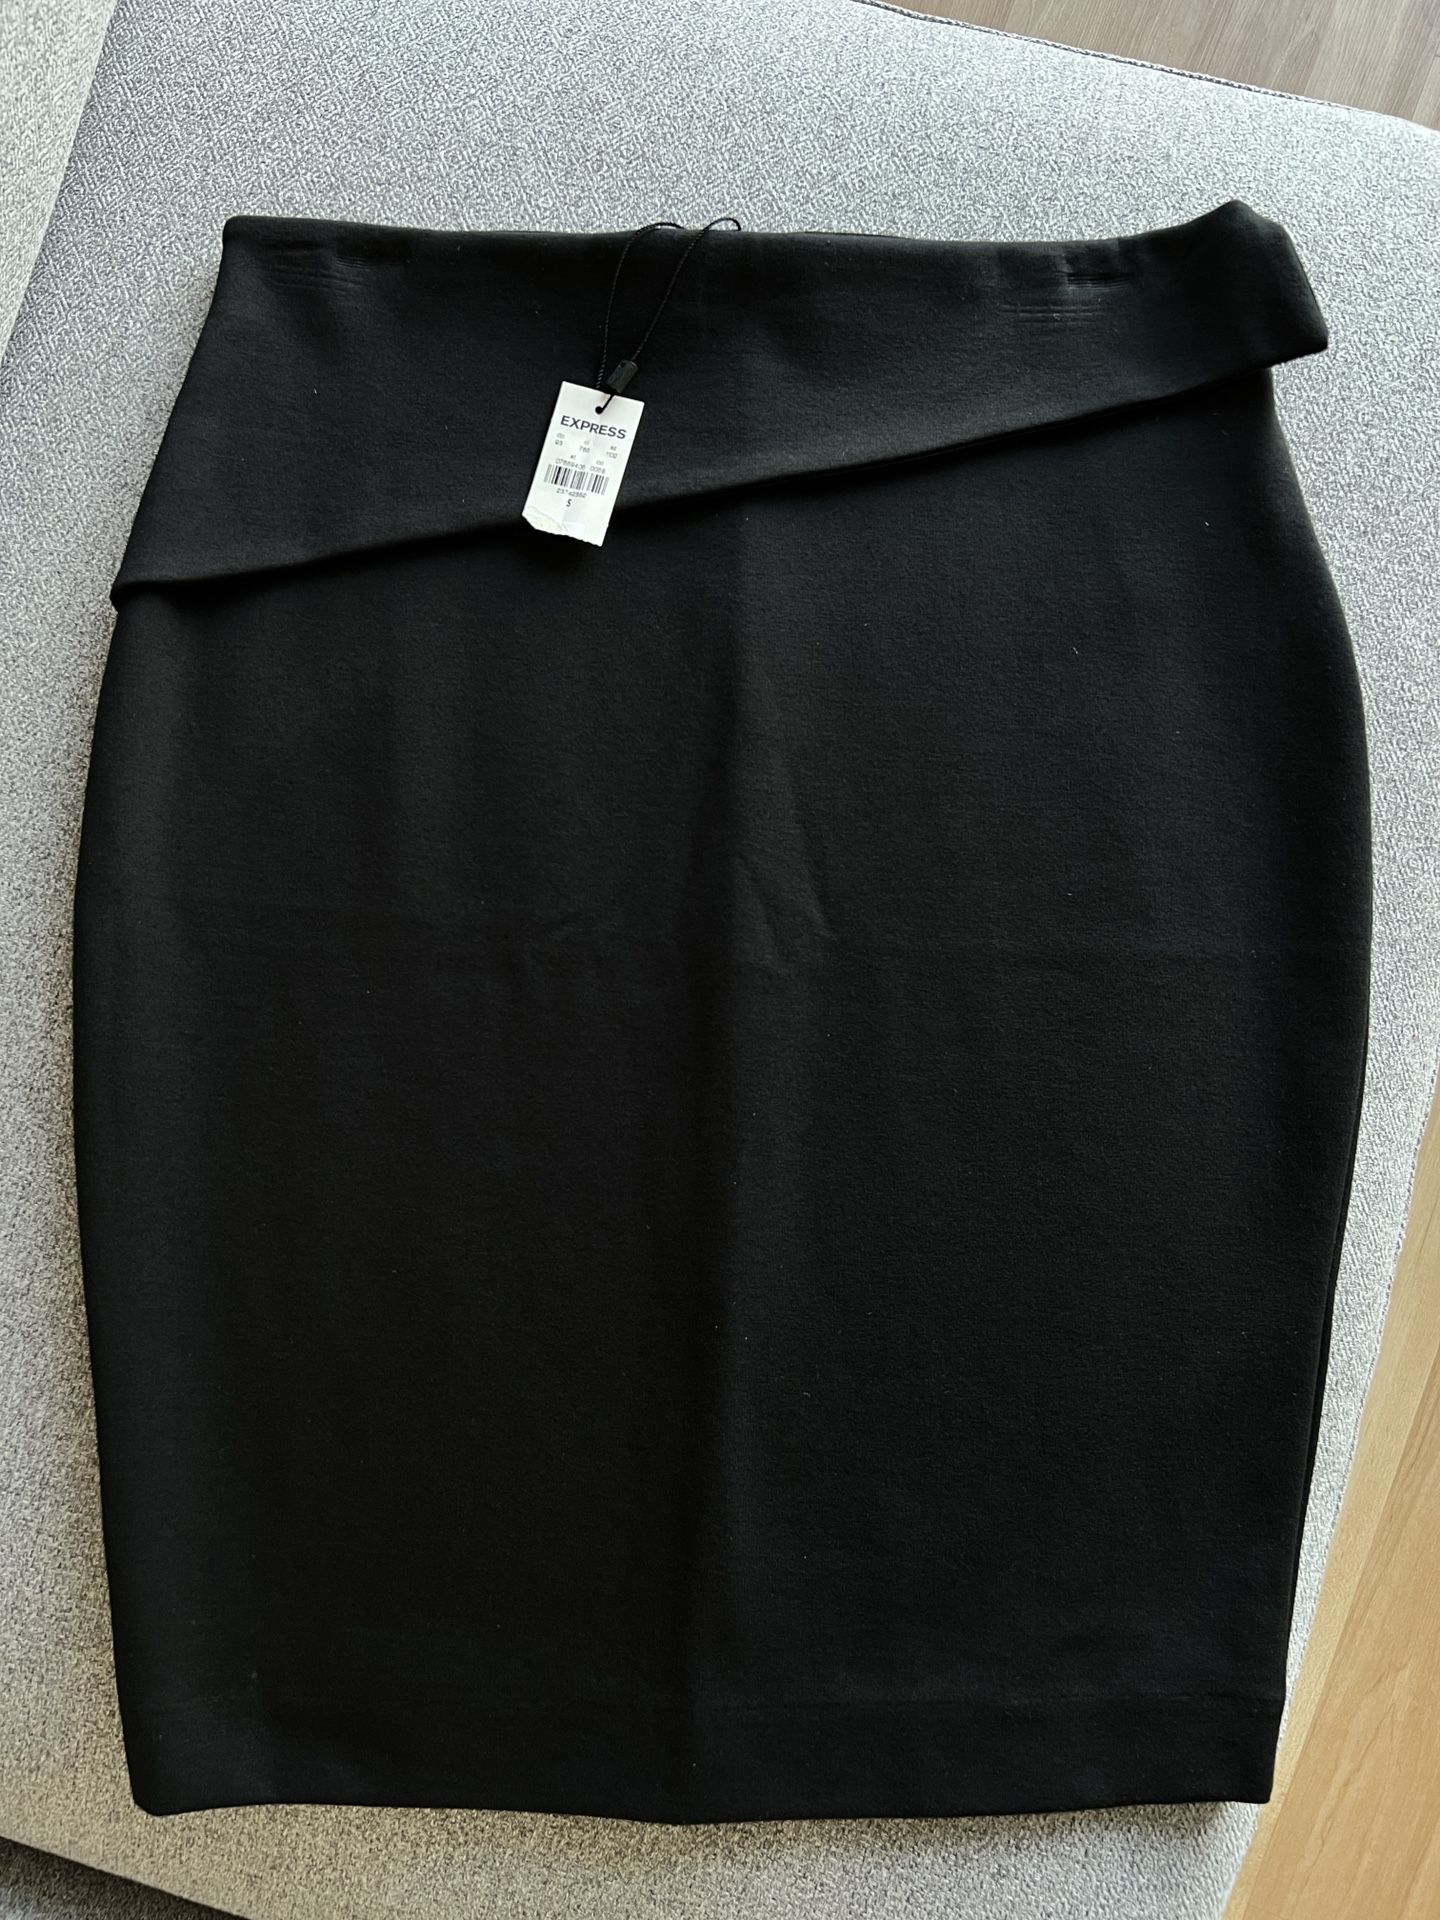 Express Pencil Skirt, Size S, New with tag